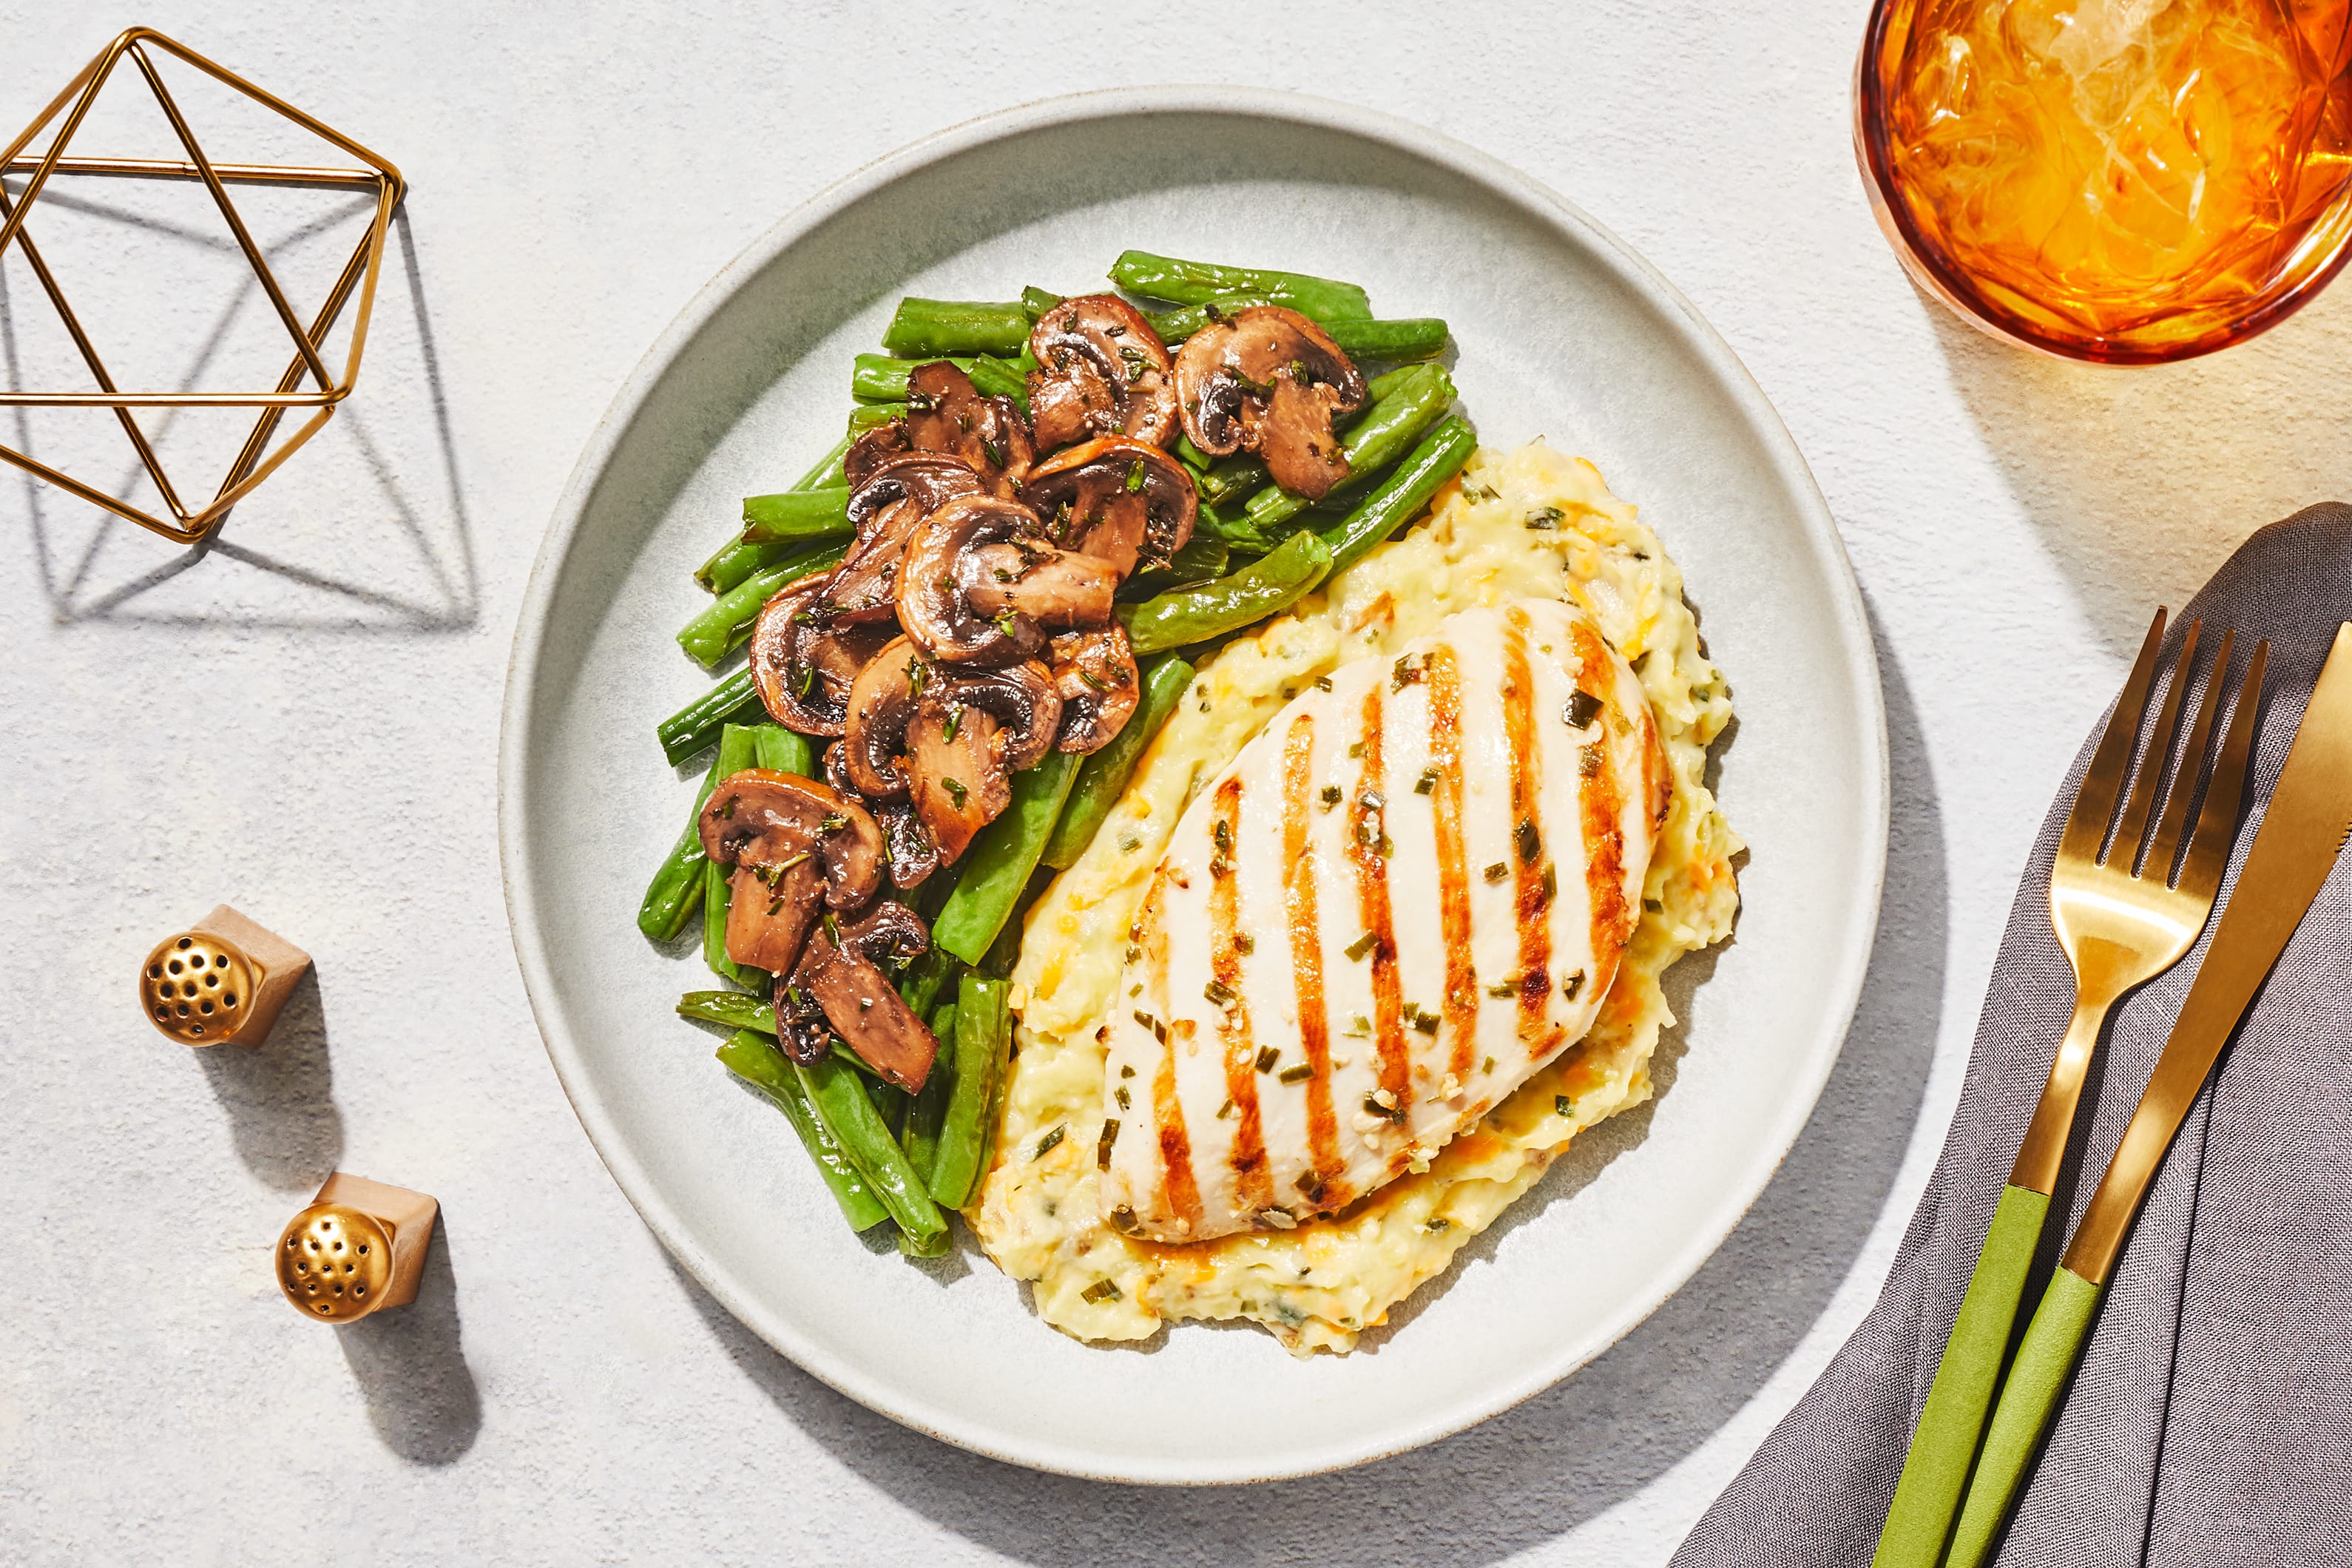 You Can Currently Get 50% Off Factor 75 Meals & Dinner Has Never Been  Easier (or More Affordable!) – SheKnows